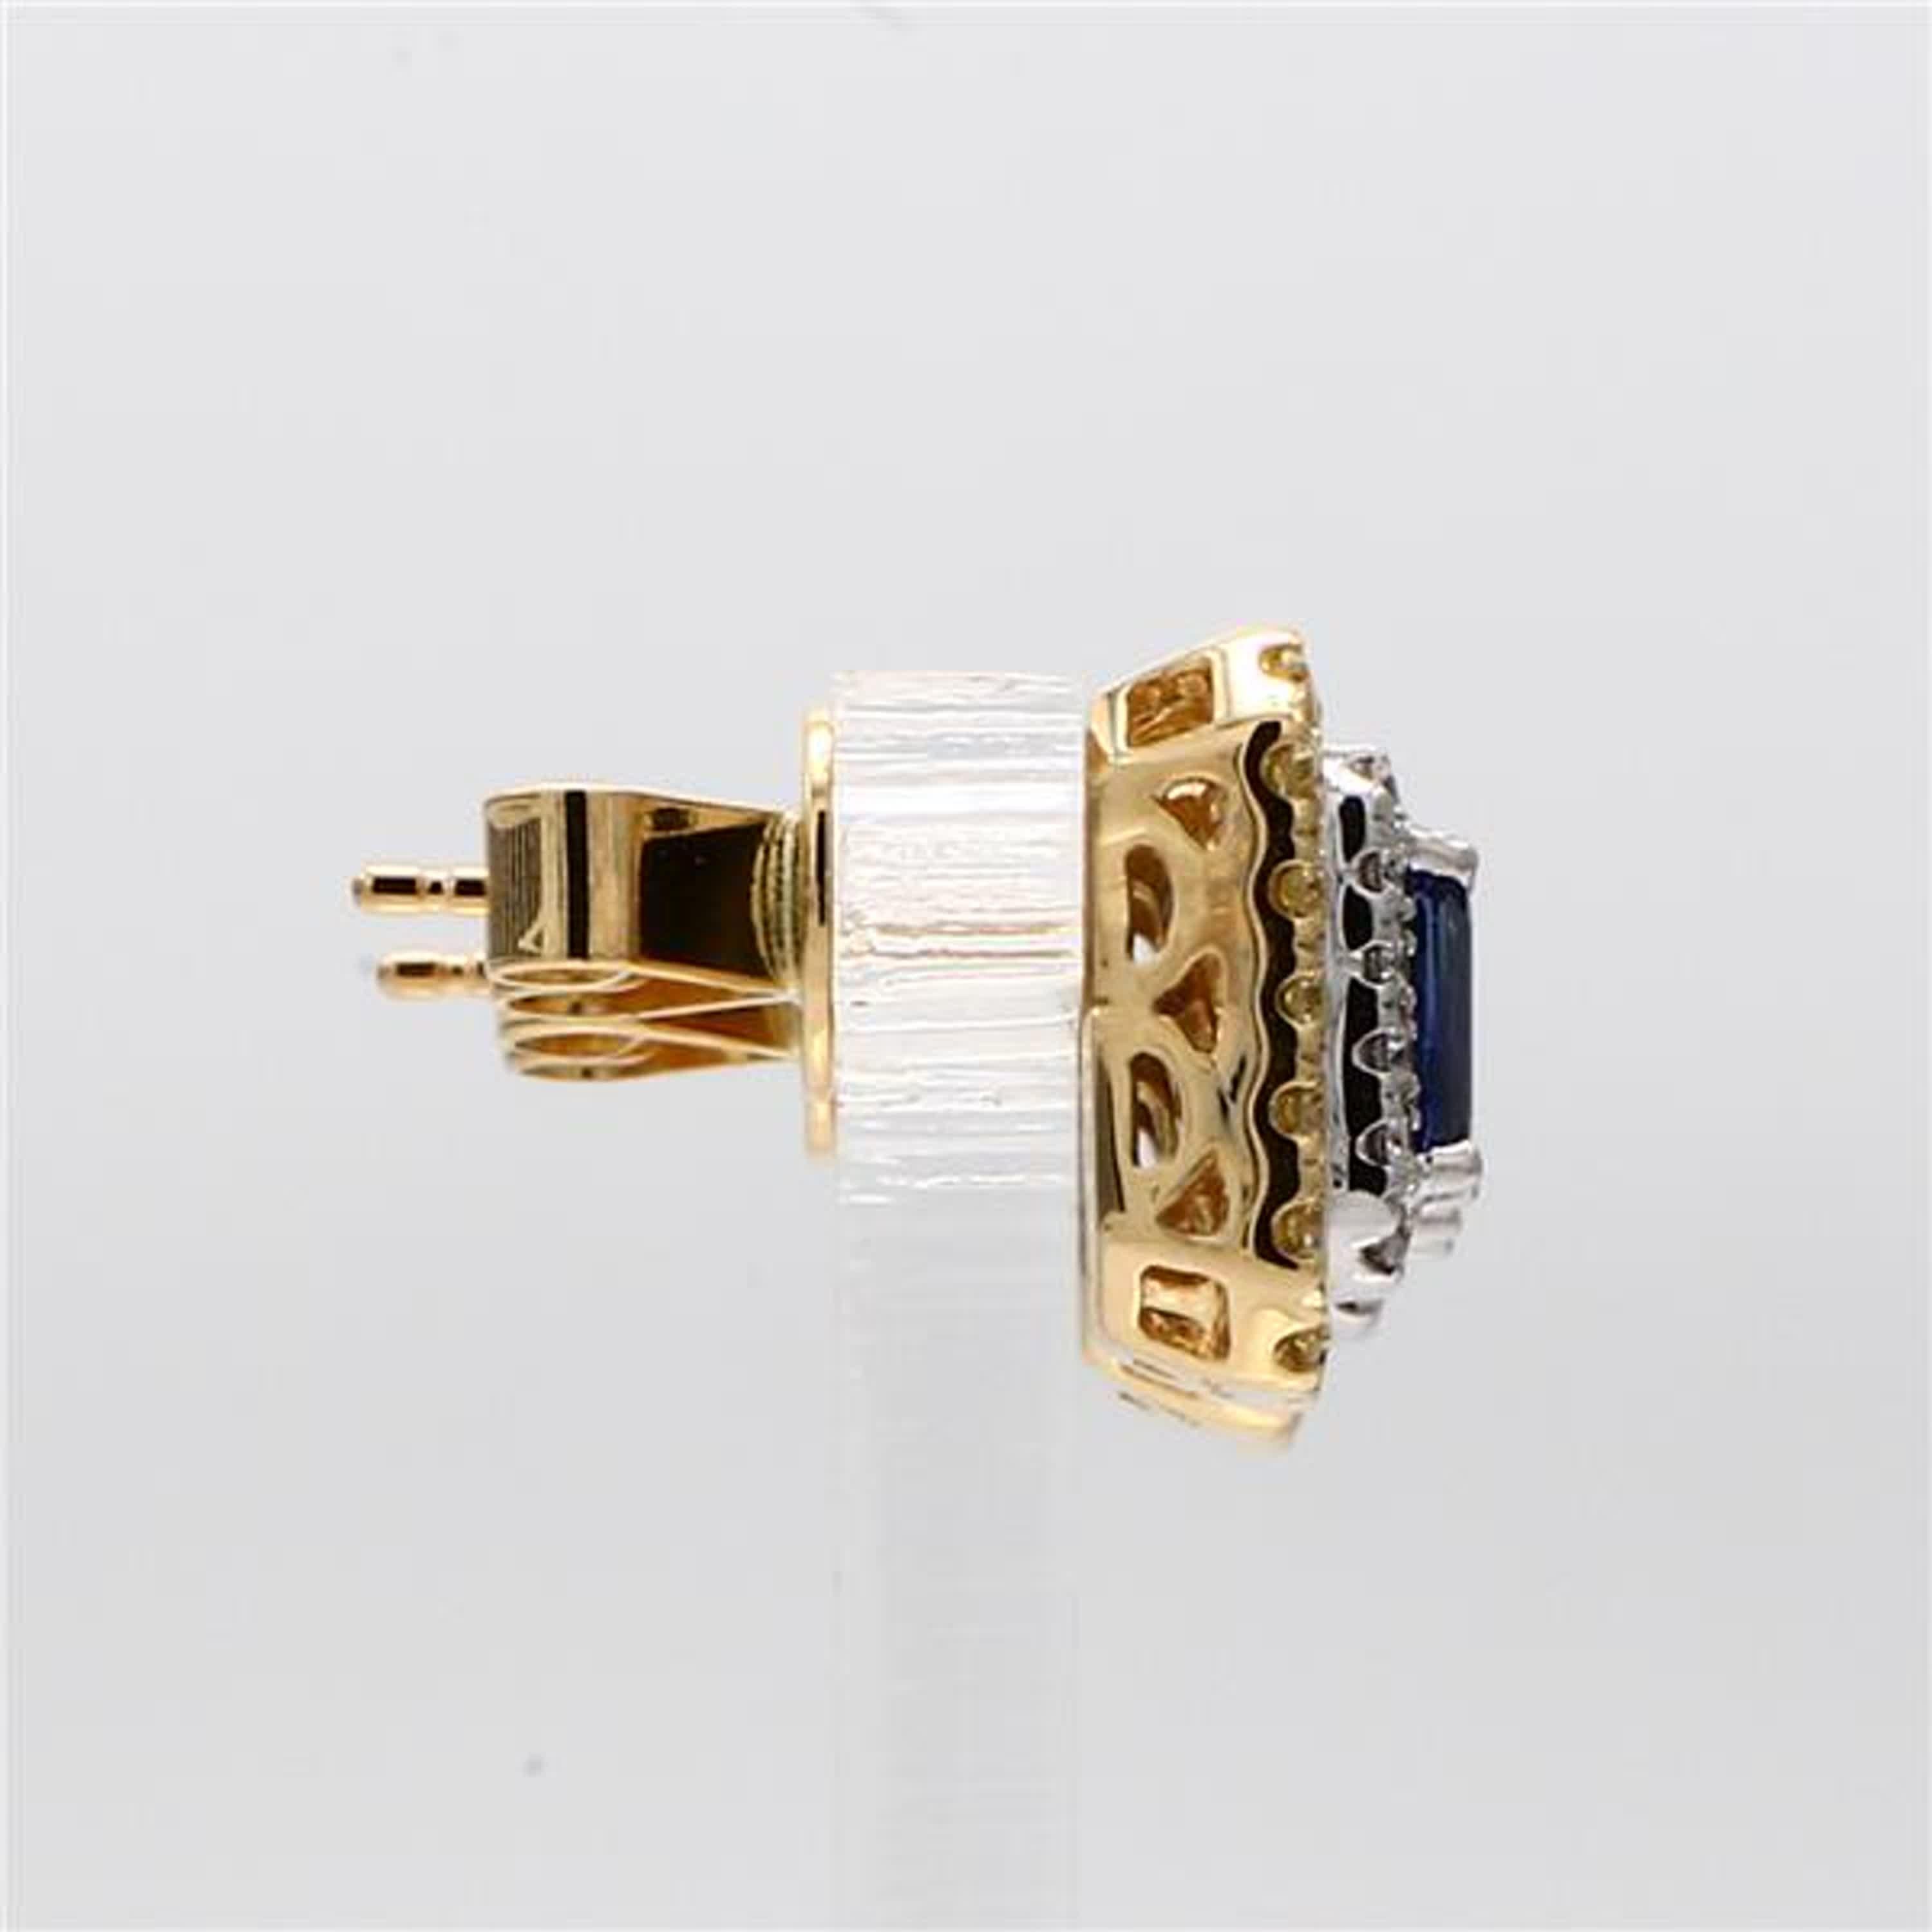 Natural Blue Emerald Cut Sapphire and Yellow Diamond 1.43 Carat TW Gold Earrings In New Condition For Sale In New York, NY